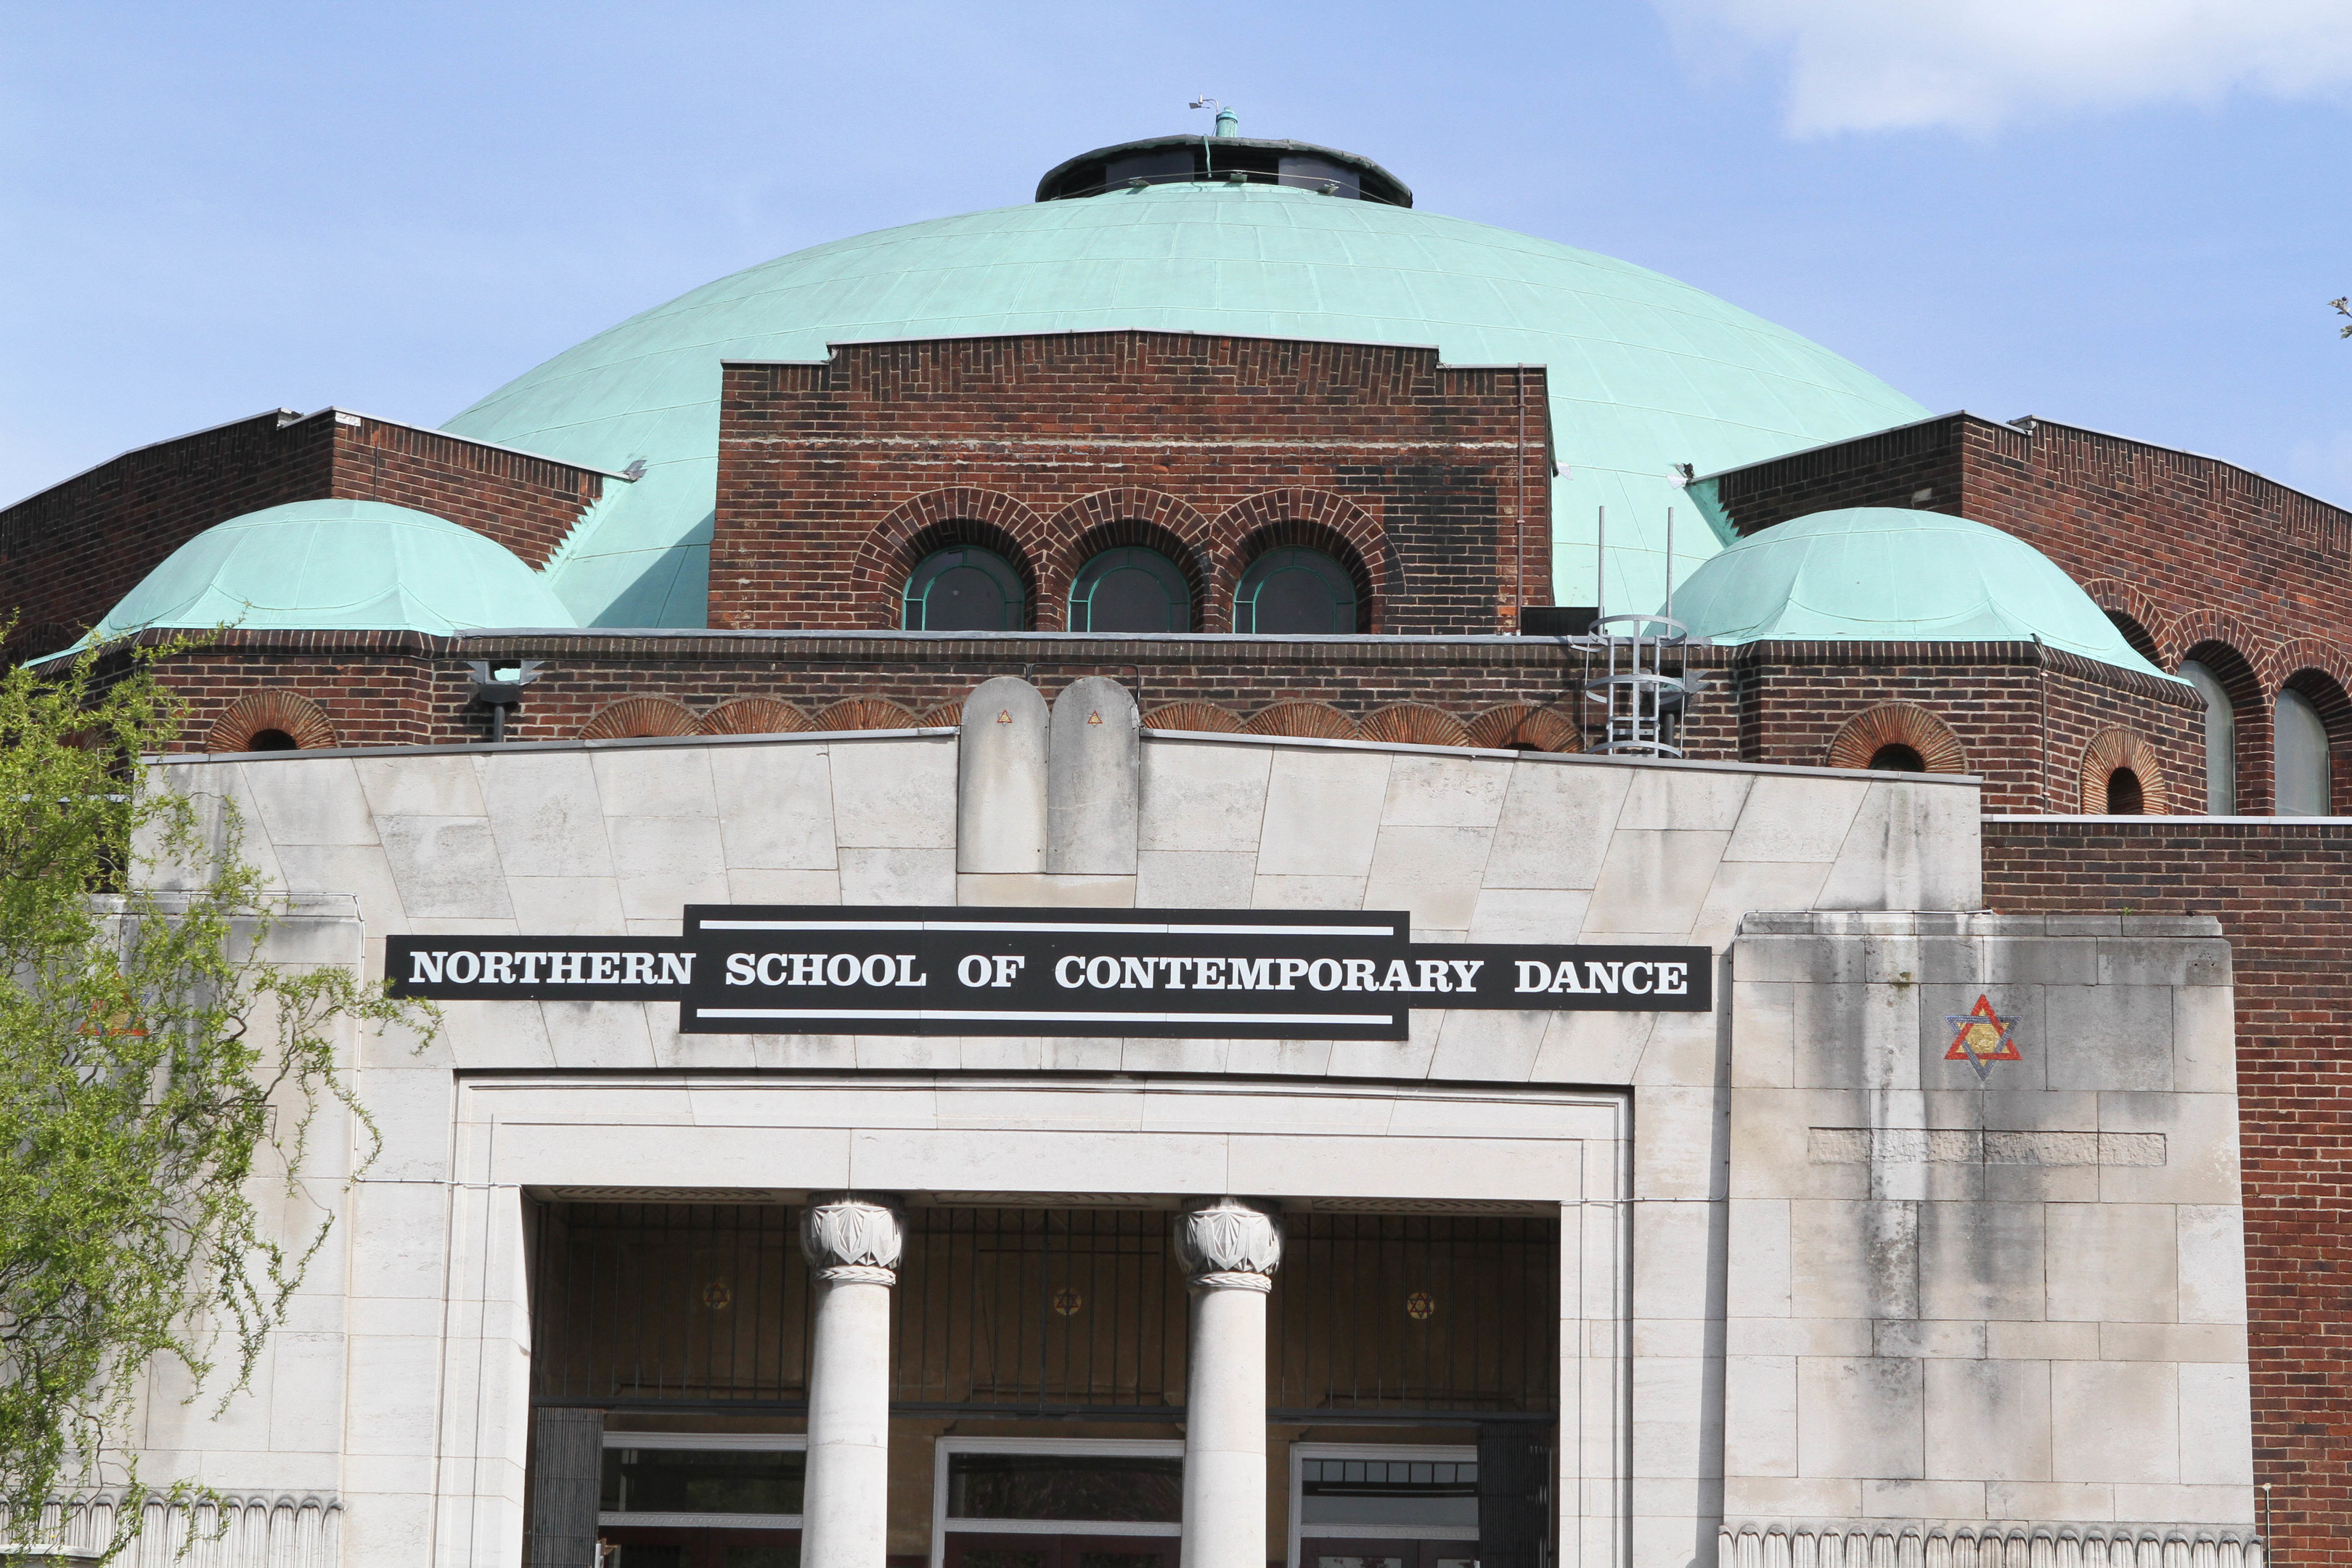 The Northern School of Contemporary Dance (C Austin/ DC Thomson)